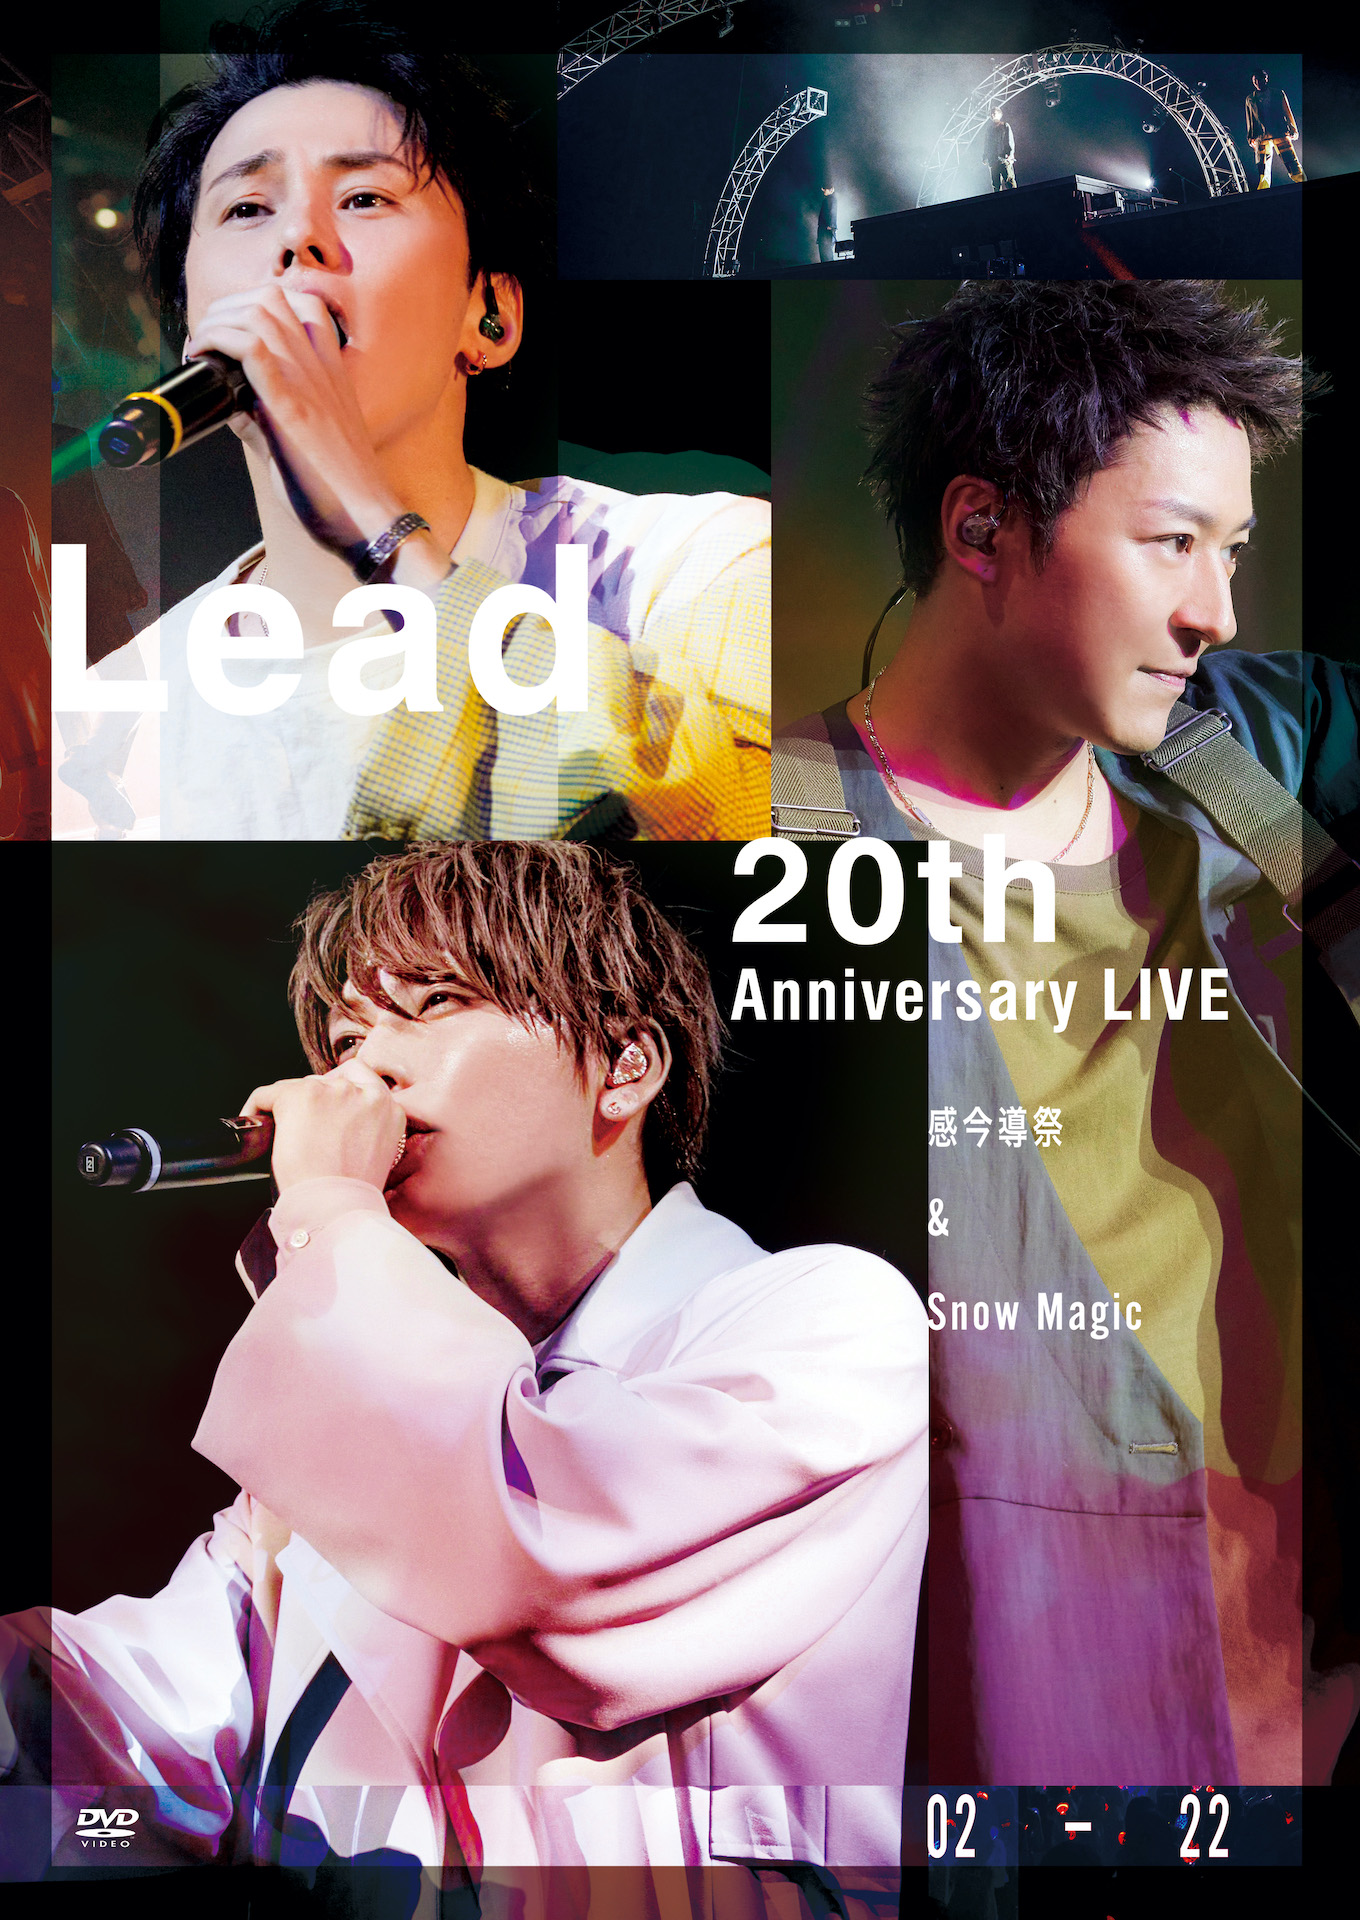 "Lead 20th Anniversary Live ~KANKONDOUSAI & Snow Magic~" Normal Edition (2DVD) Release on March 22th, 2023